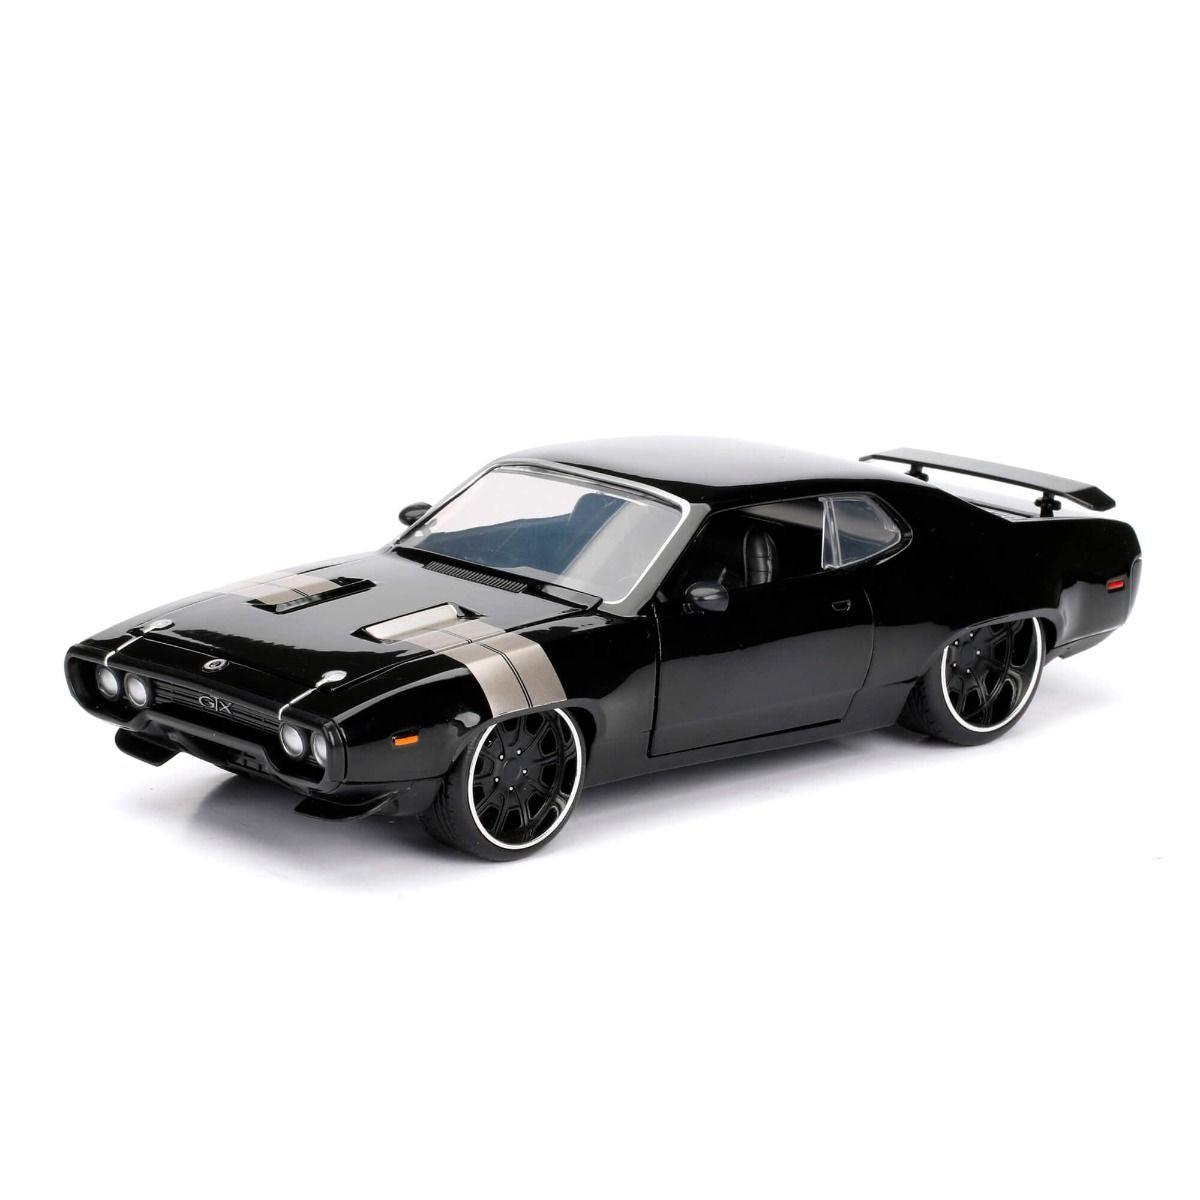 Fast and Furious 8 - Dom's '72 Plymouth GTX 1:24 Scale Hollywood Ride Jada Toys Titan Pop Culture